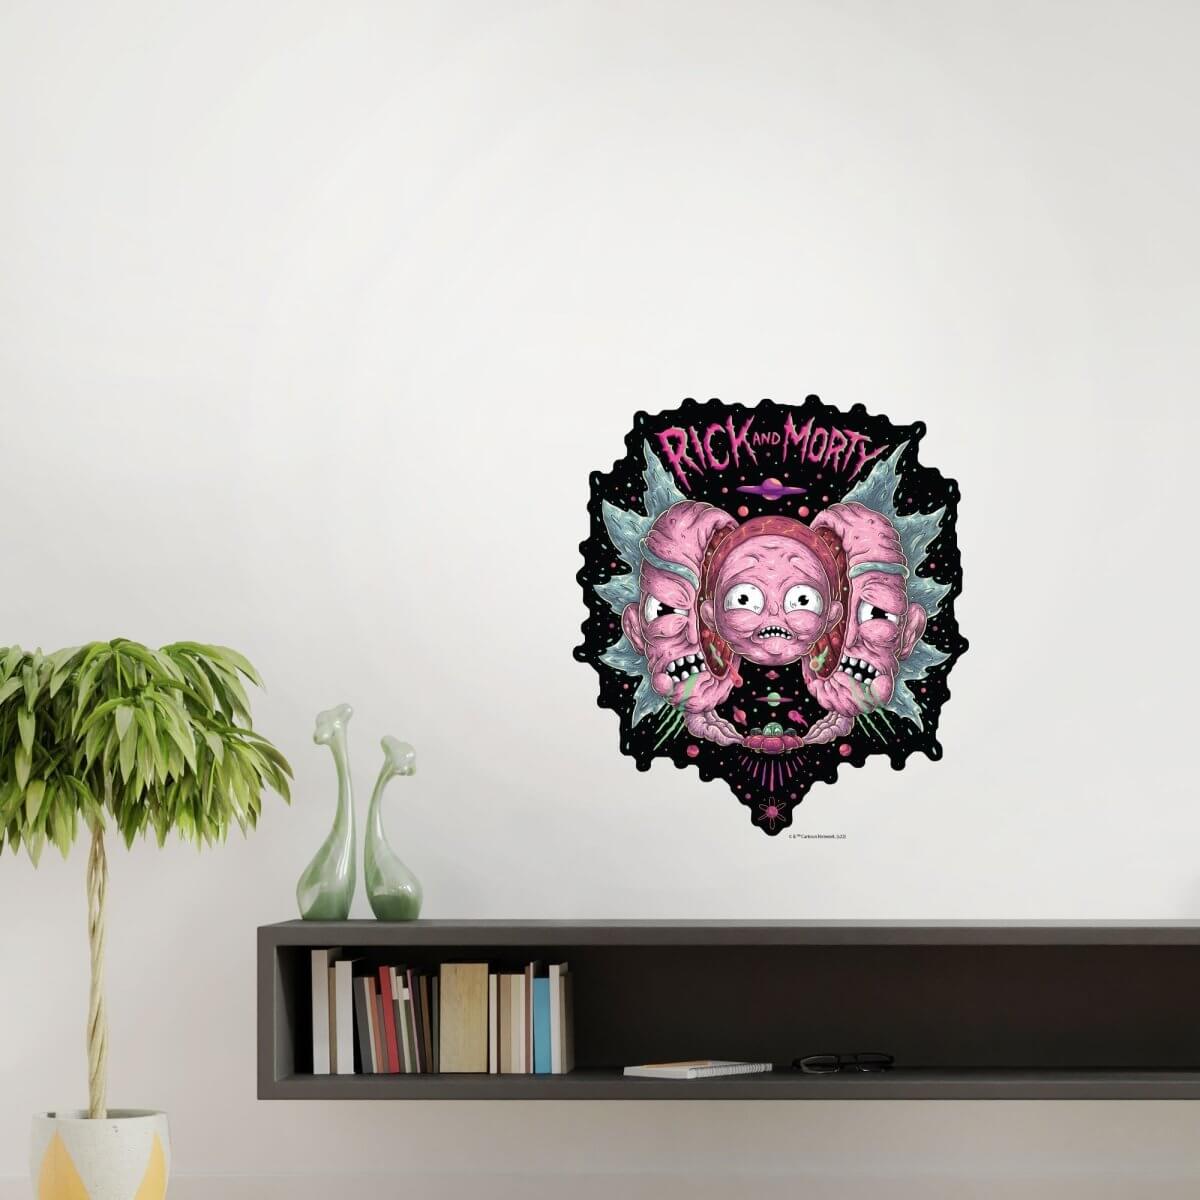 Kismet Decals Rick & Morty Psychedelic Monsters 5 Licensed Wall Sticker - Easy DIY Home & Kids Room Decor Wall Decal Art - Kismet Decals